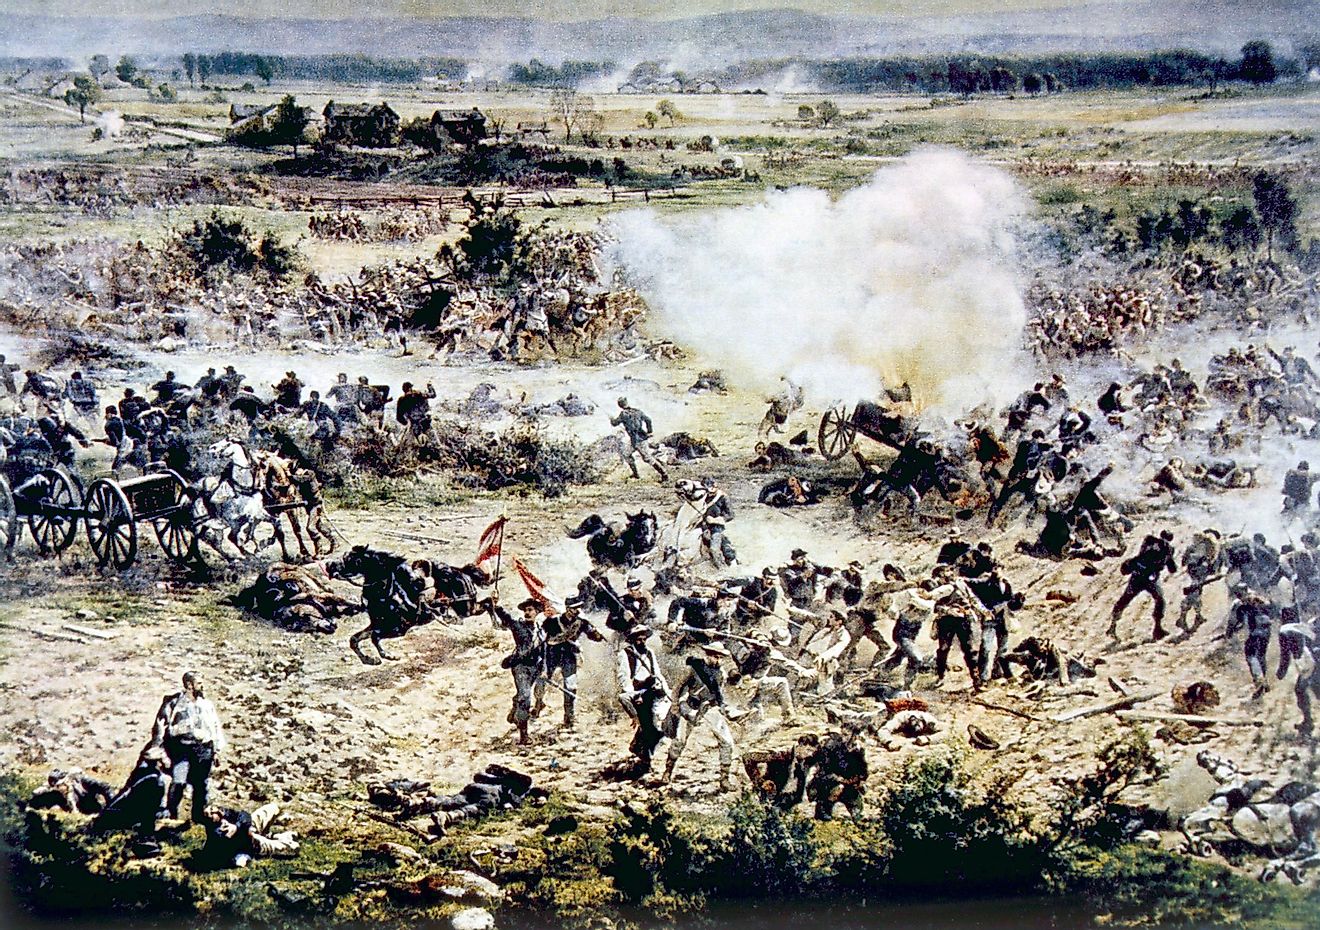 The Battle of Gettysburg, Pickett's charge, July 3, 1863, portion of a panoramic painting by Paul Philippoteaux.